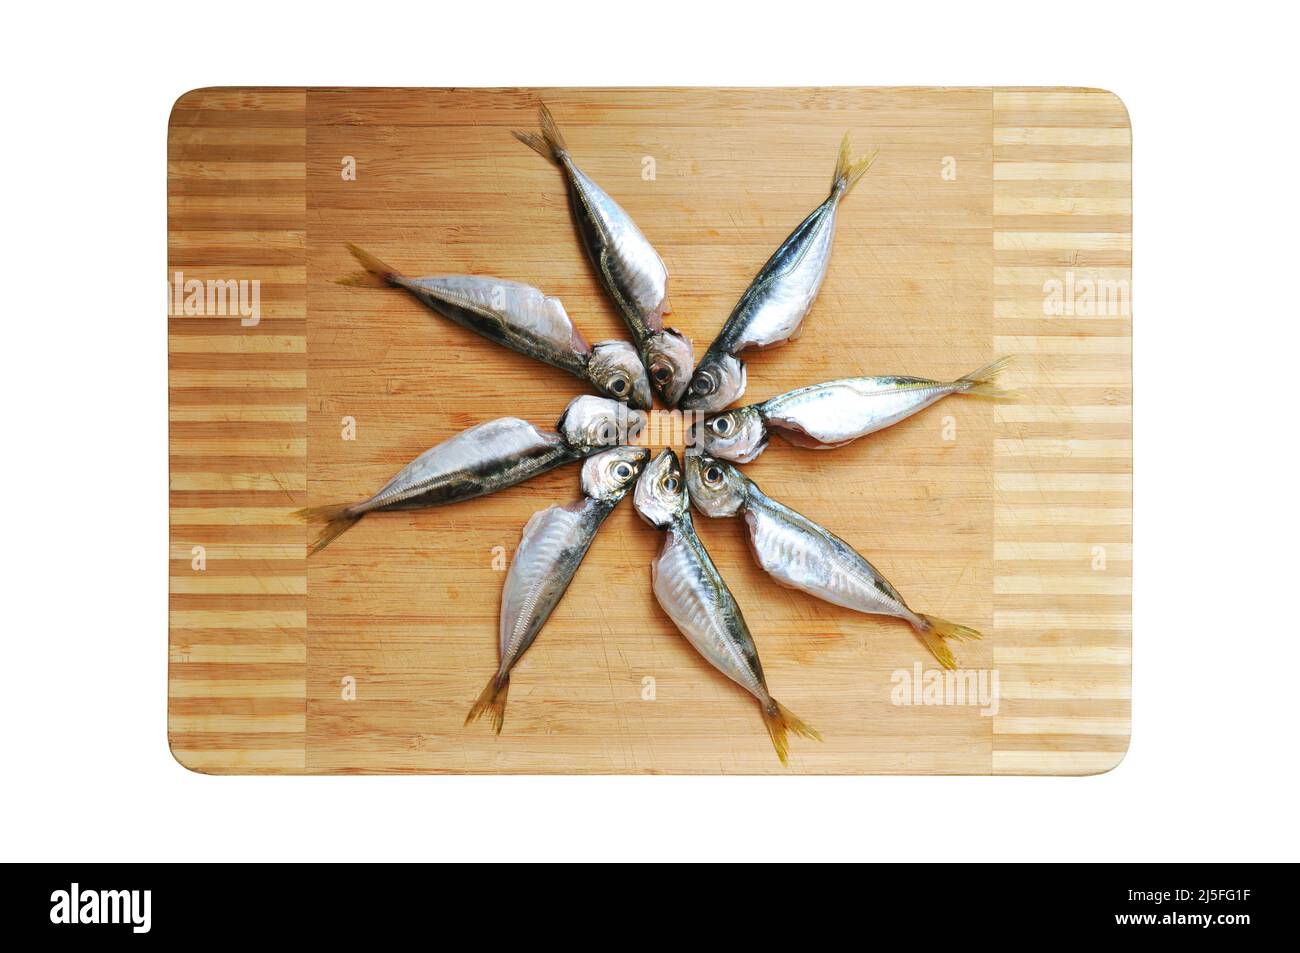 Cleaned and ready to cook fresh fish horse mackerel, istavrit fish, on cutting board Stock Photo